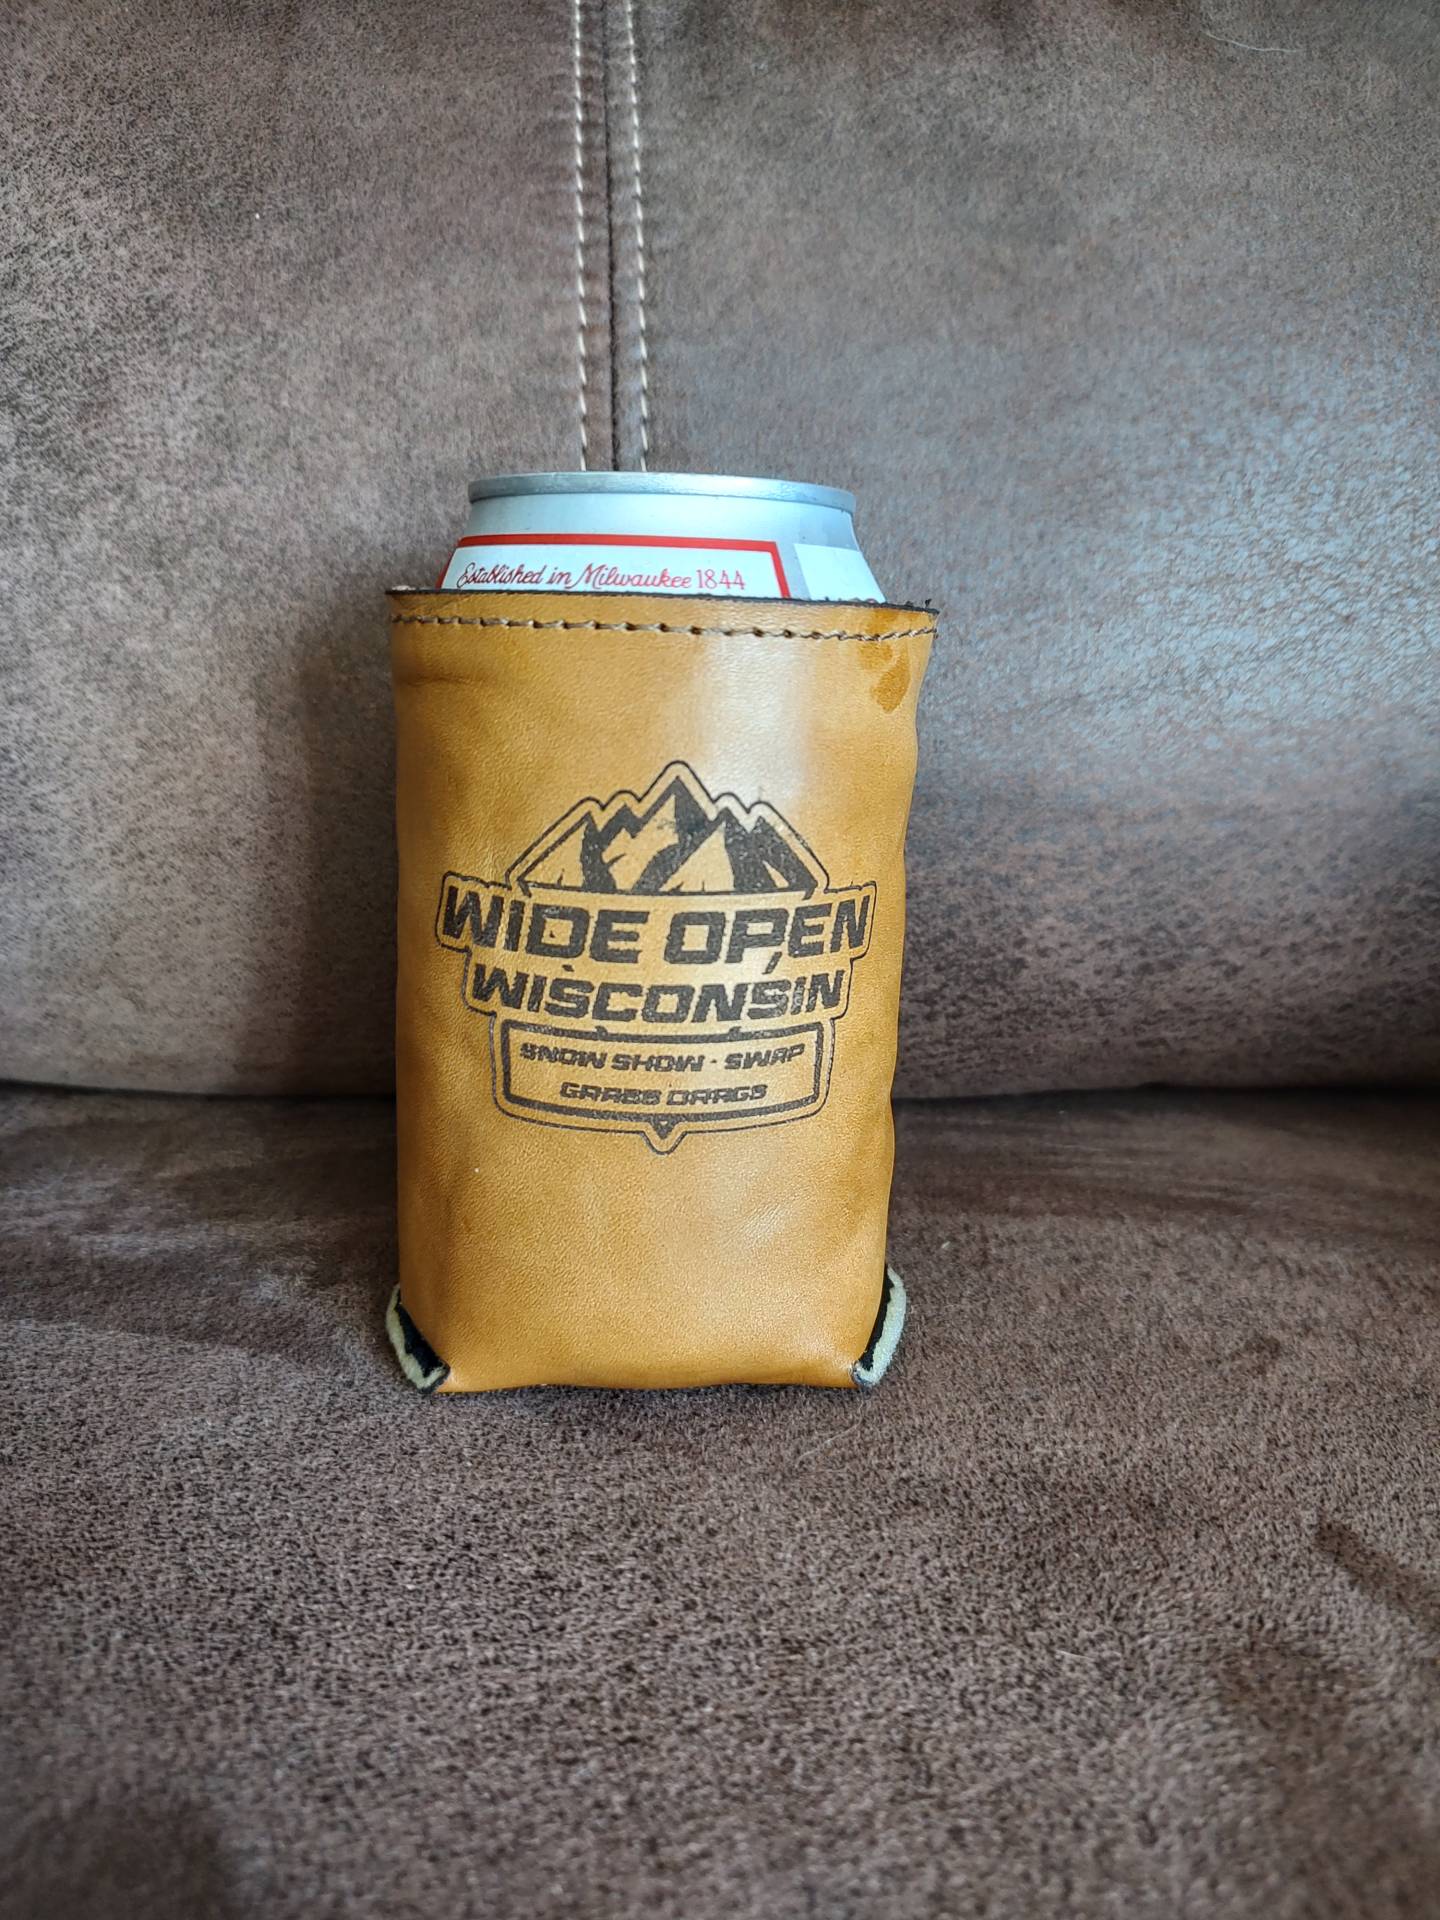 Hey there fellow woodworkers. I make wooden bottle koozies. I put